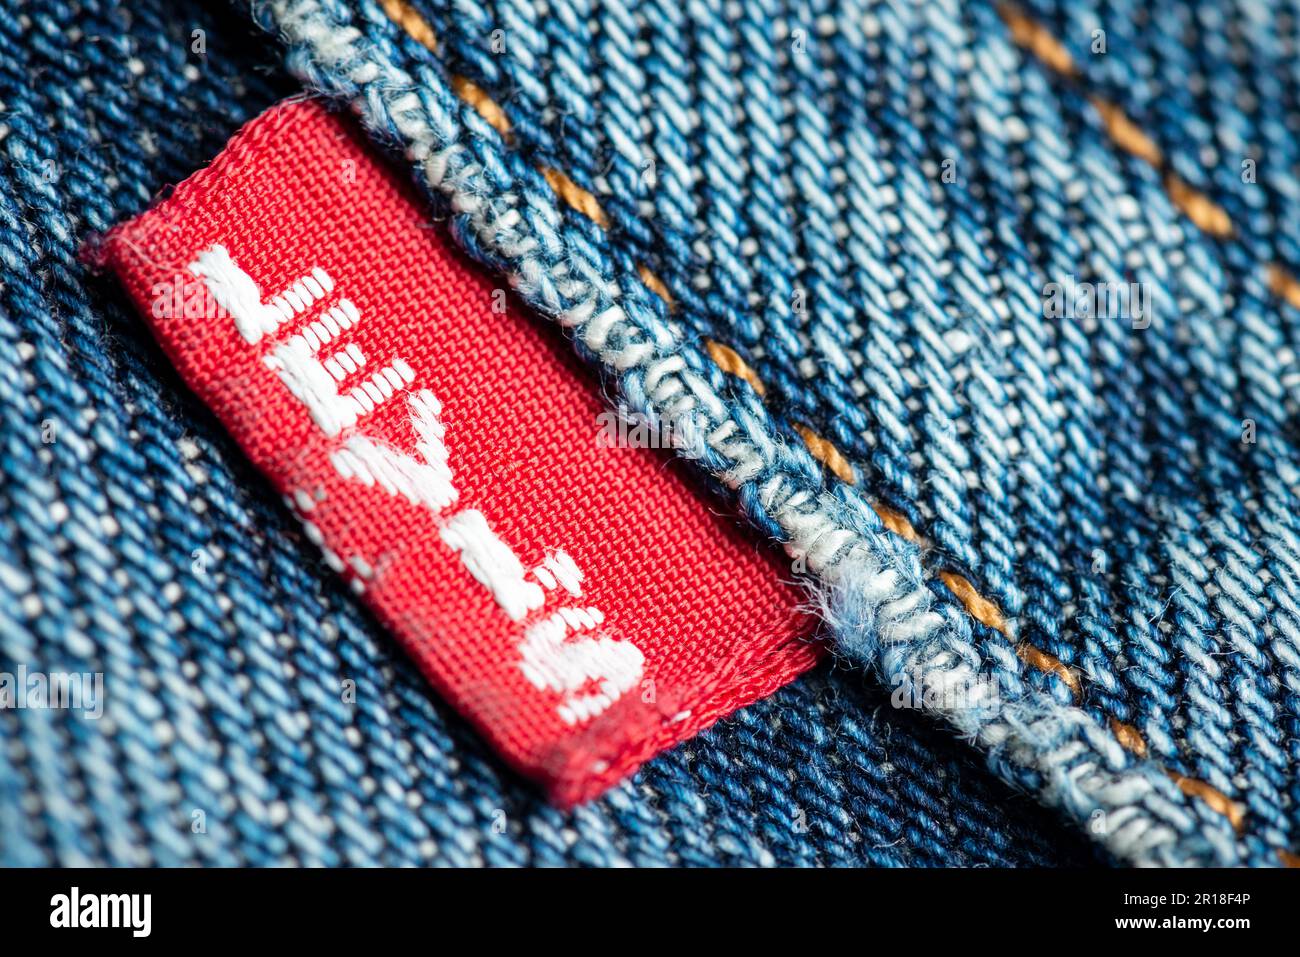 Levi's jeans red tab close up detail Stock Photo